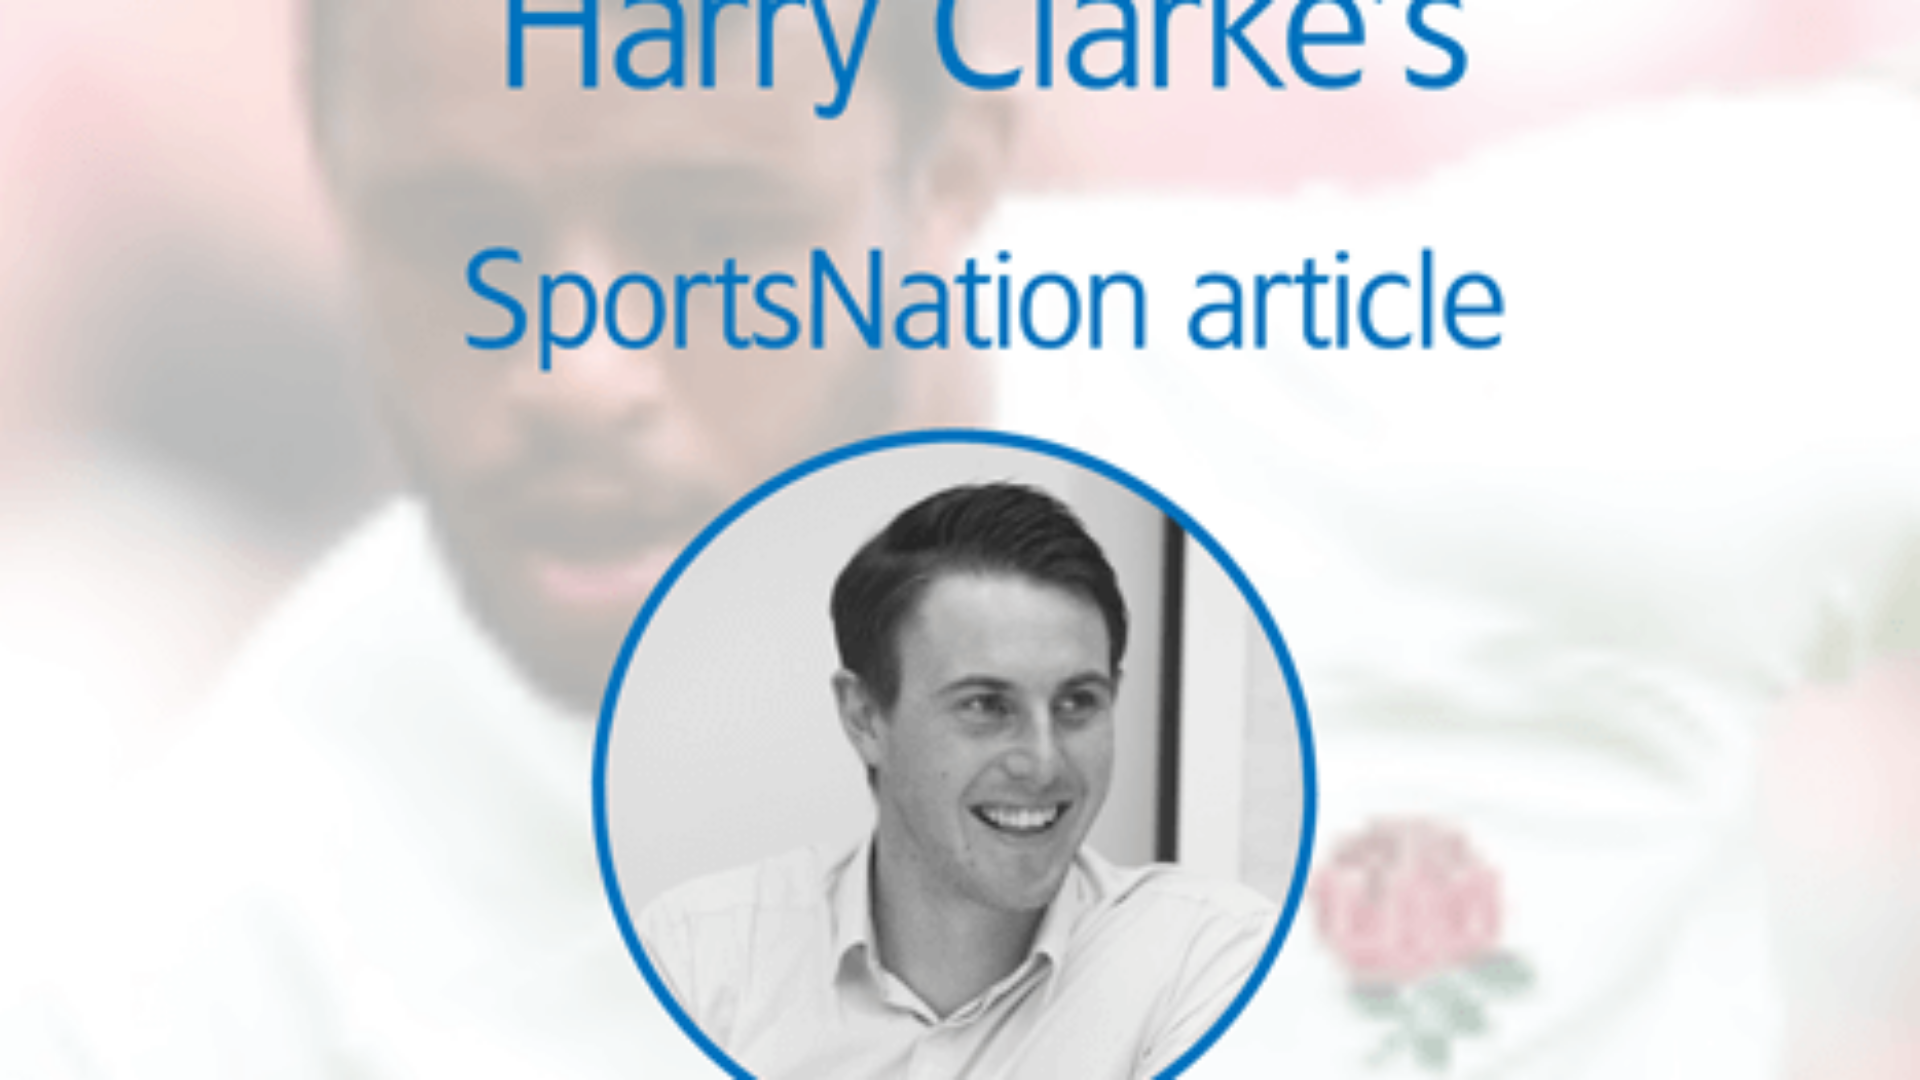 Harry Clarke writes an article for SportsNation